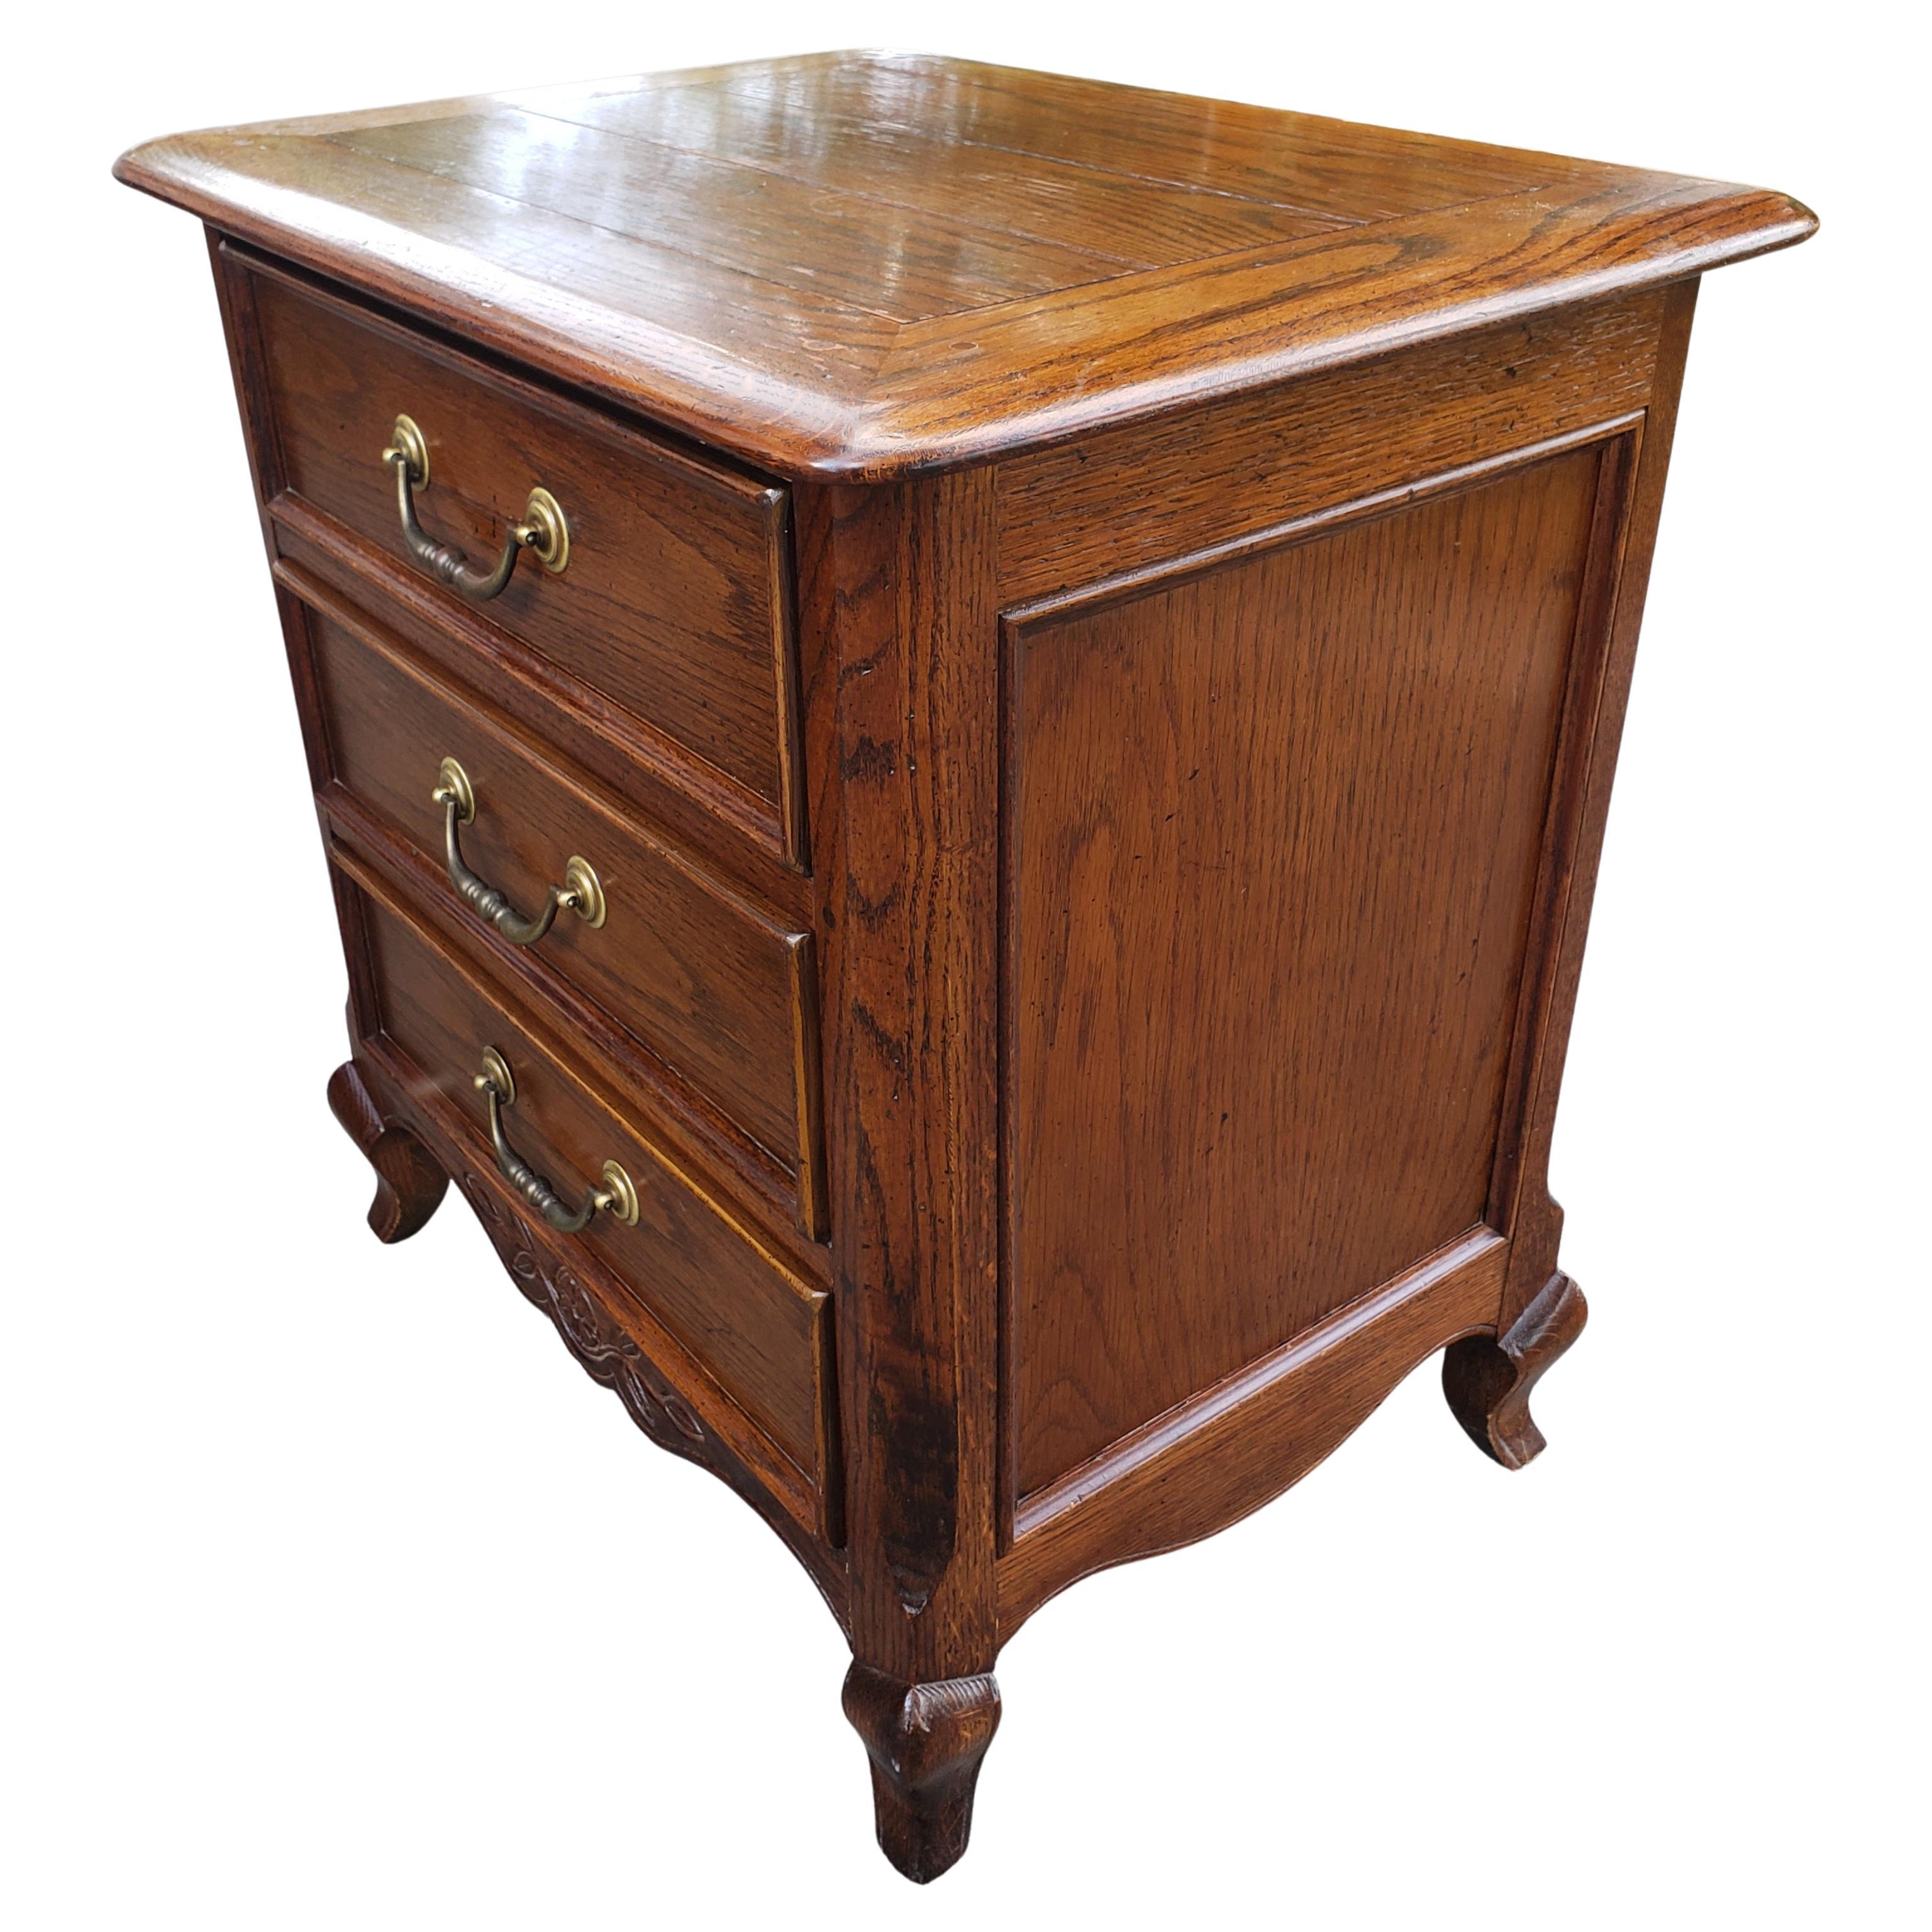 American Century Furniture French Country Oak Bedside Chests of Drawers Nighstands, Pair